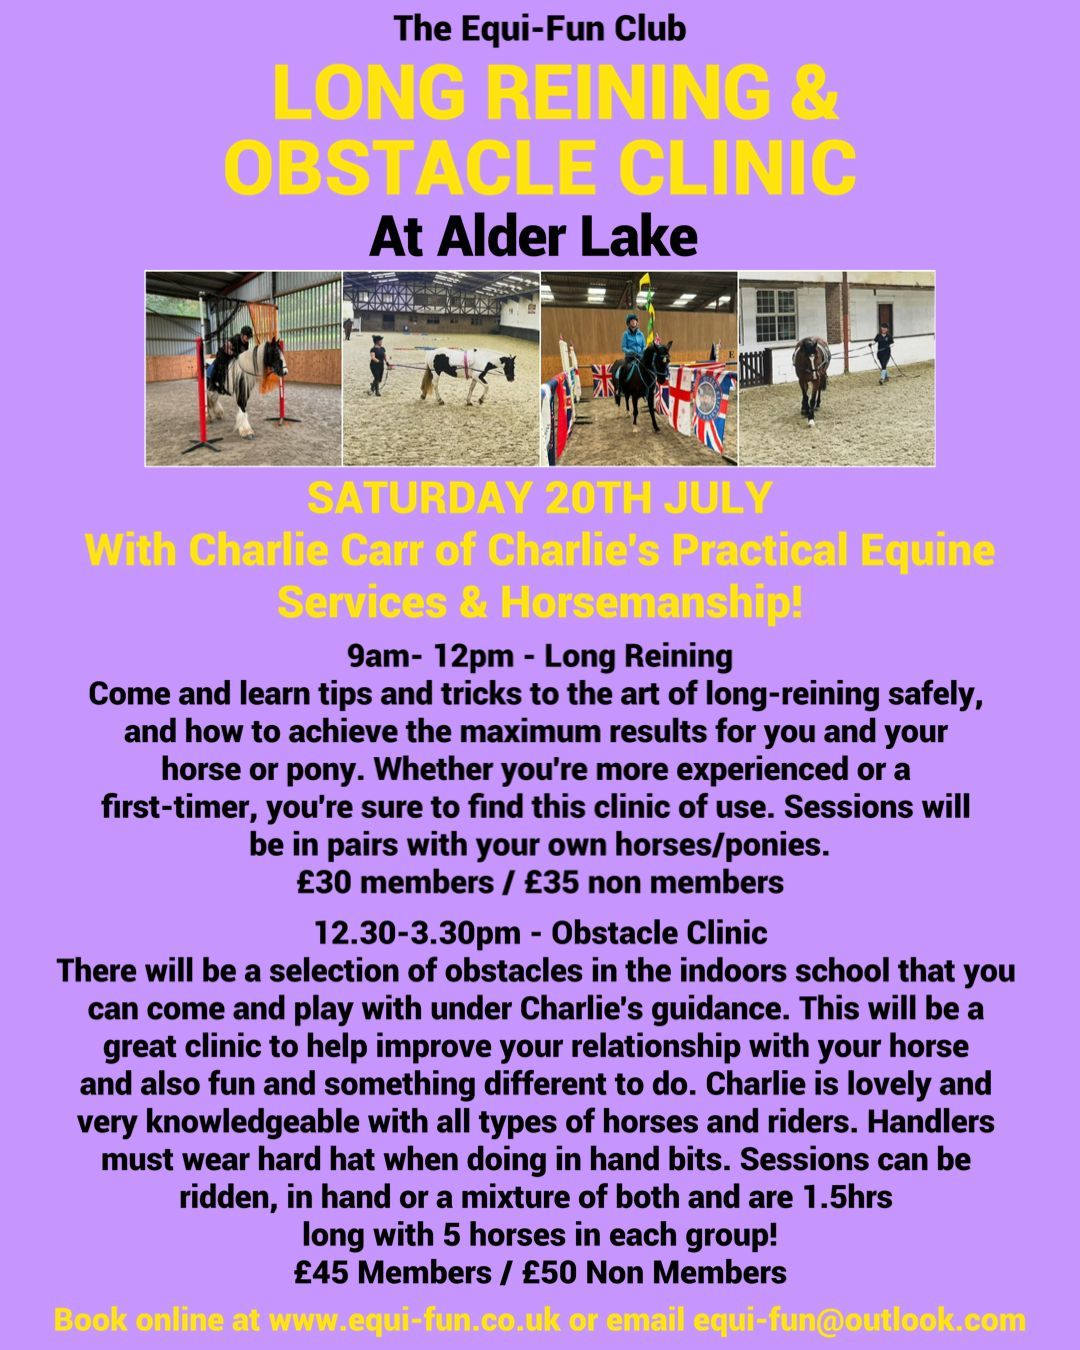 LONG REINING & OBSTACLE CLINIC OPEN TO ALL